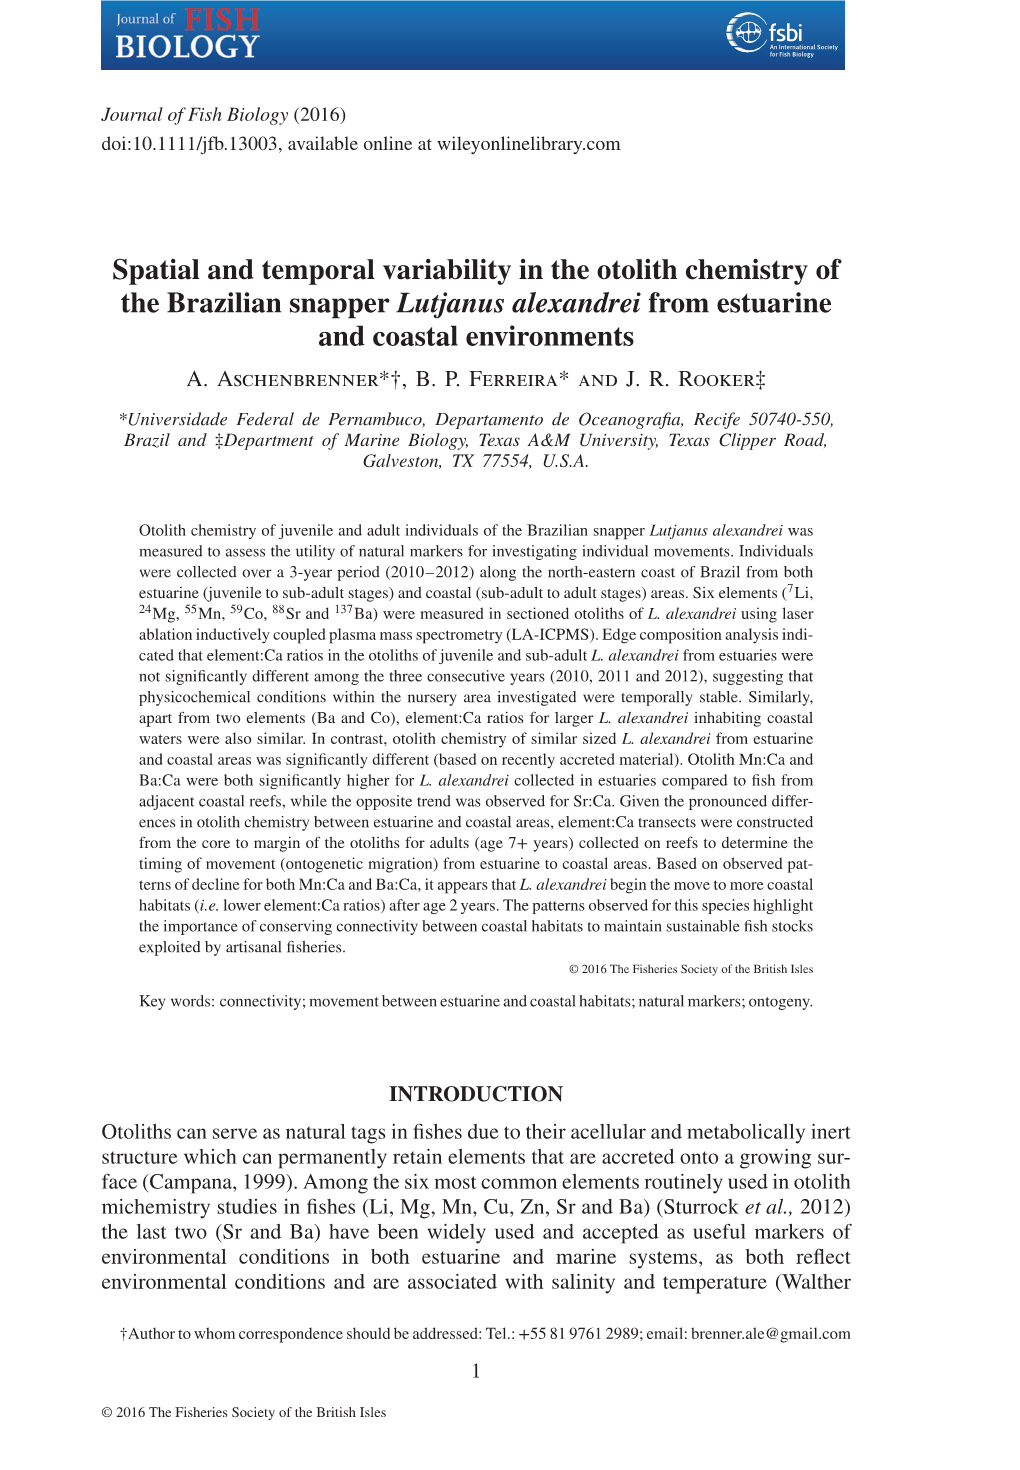 Spatial and Temporal Variability in the Otolith Chemistry of the Brazilian Snapper Lutjanus Alexandrei from Estuarine and Coastal Environments A